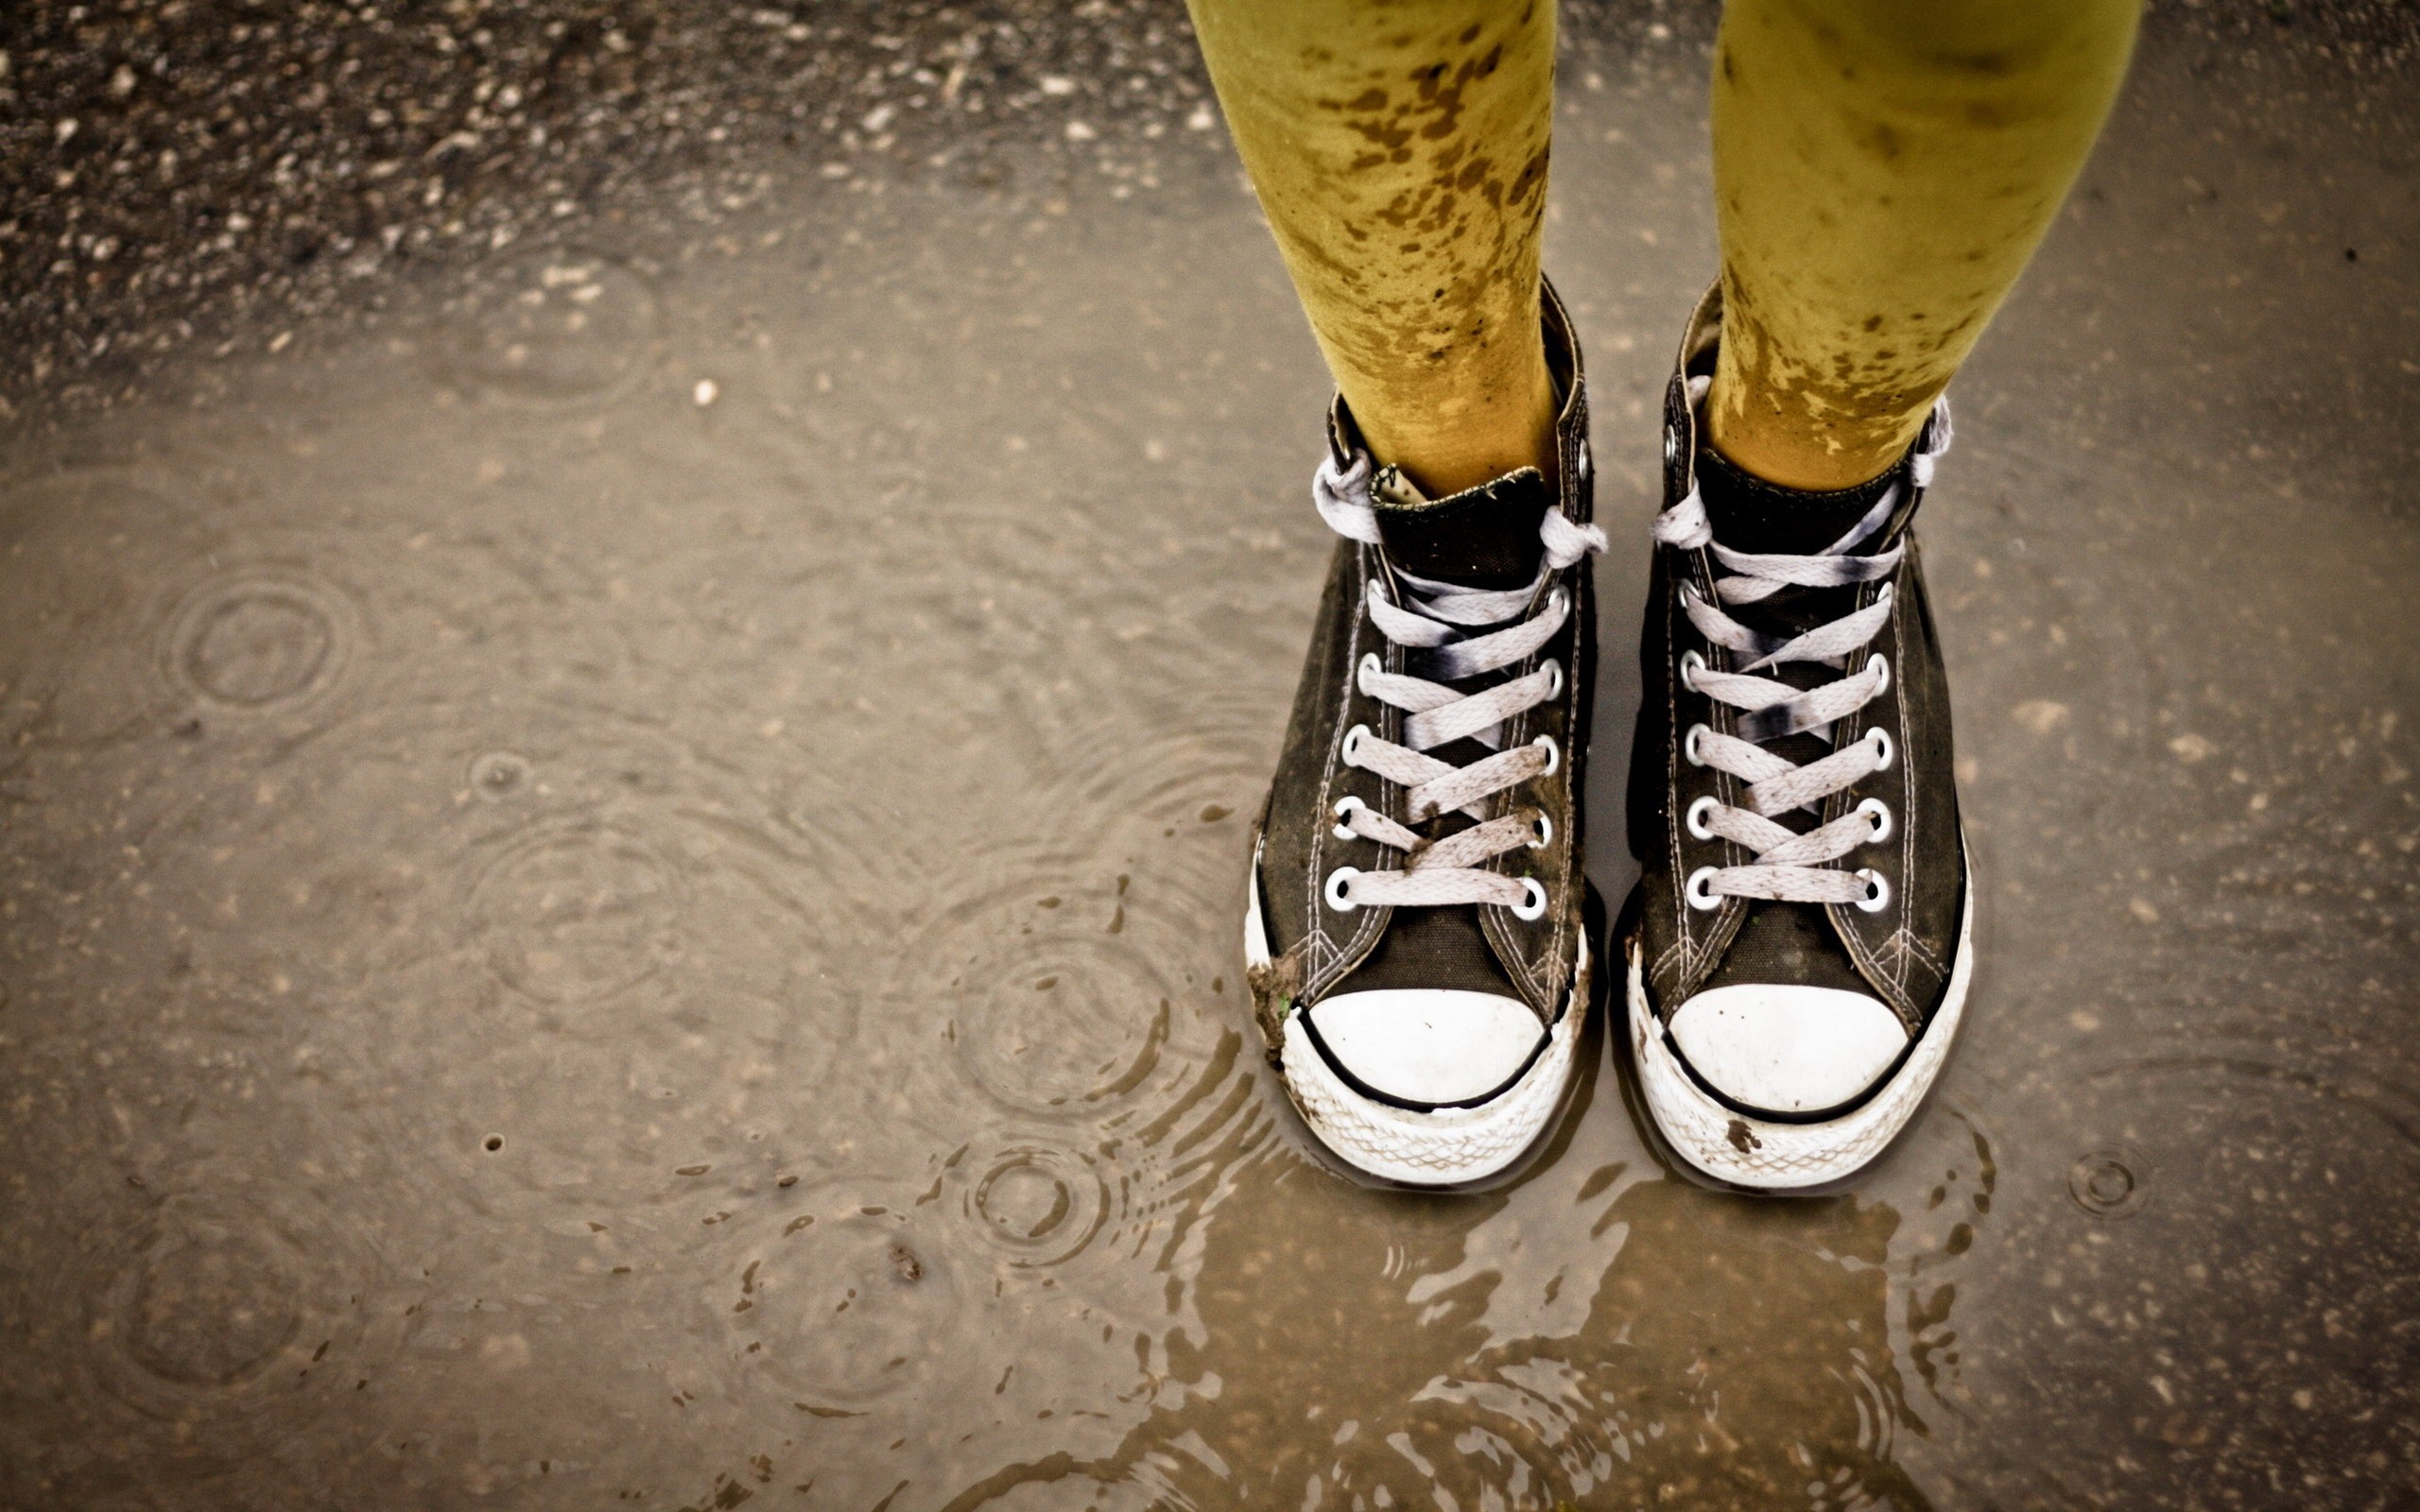 People 2560x1600 ripples rain shoes puddle Converse yellow